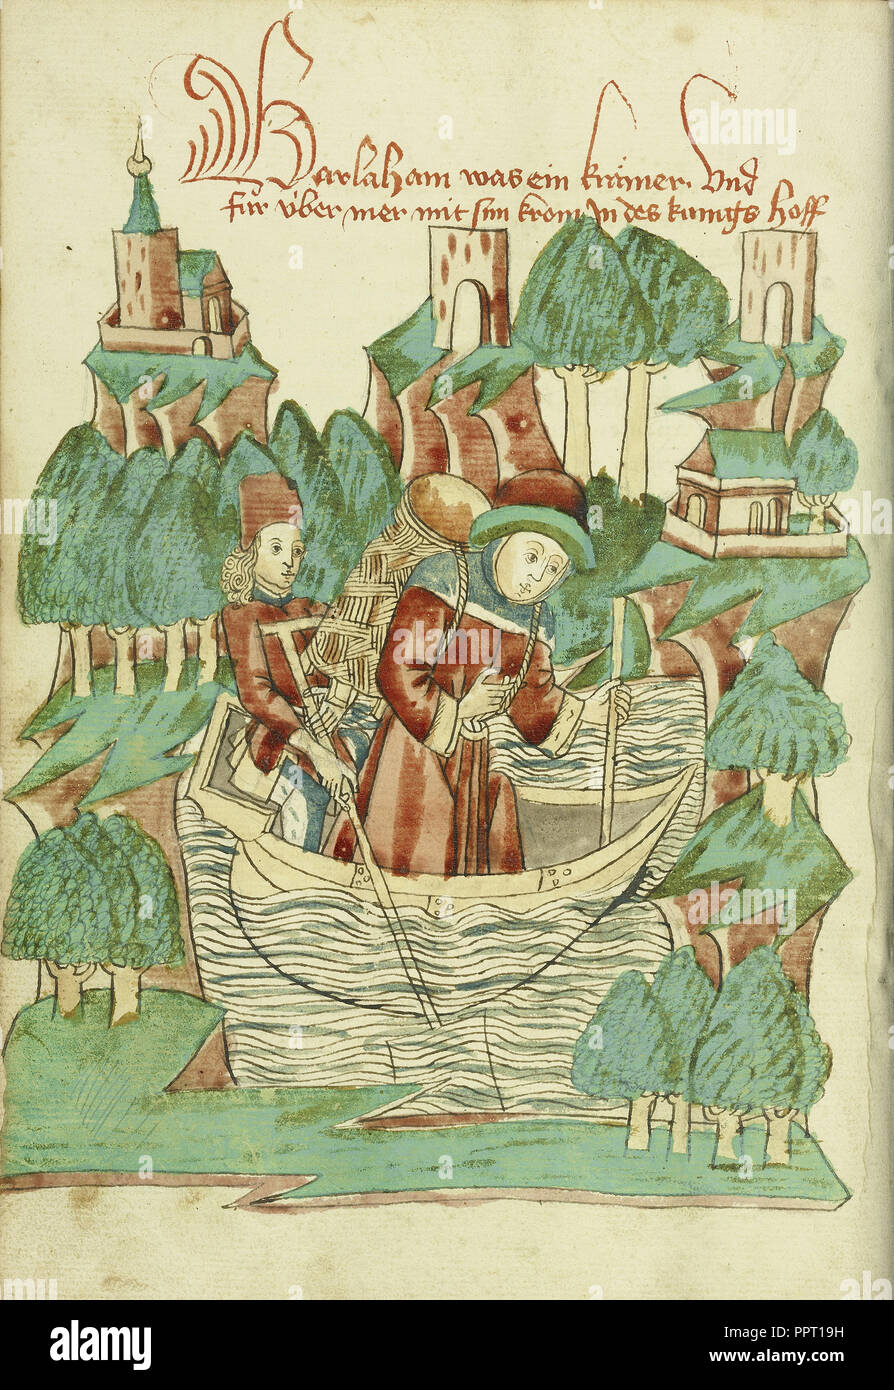 Barlaam, Carrying a Shoulder Pack, Crosses a River; Follower of Hans Schilling, German, active 1459 - 1467) Stock Photo